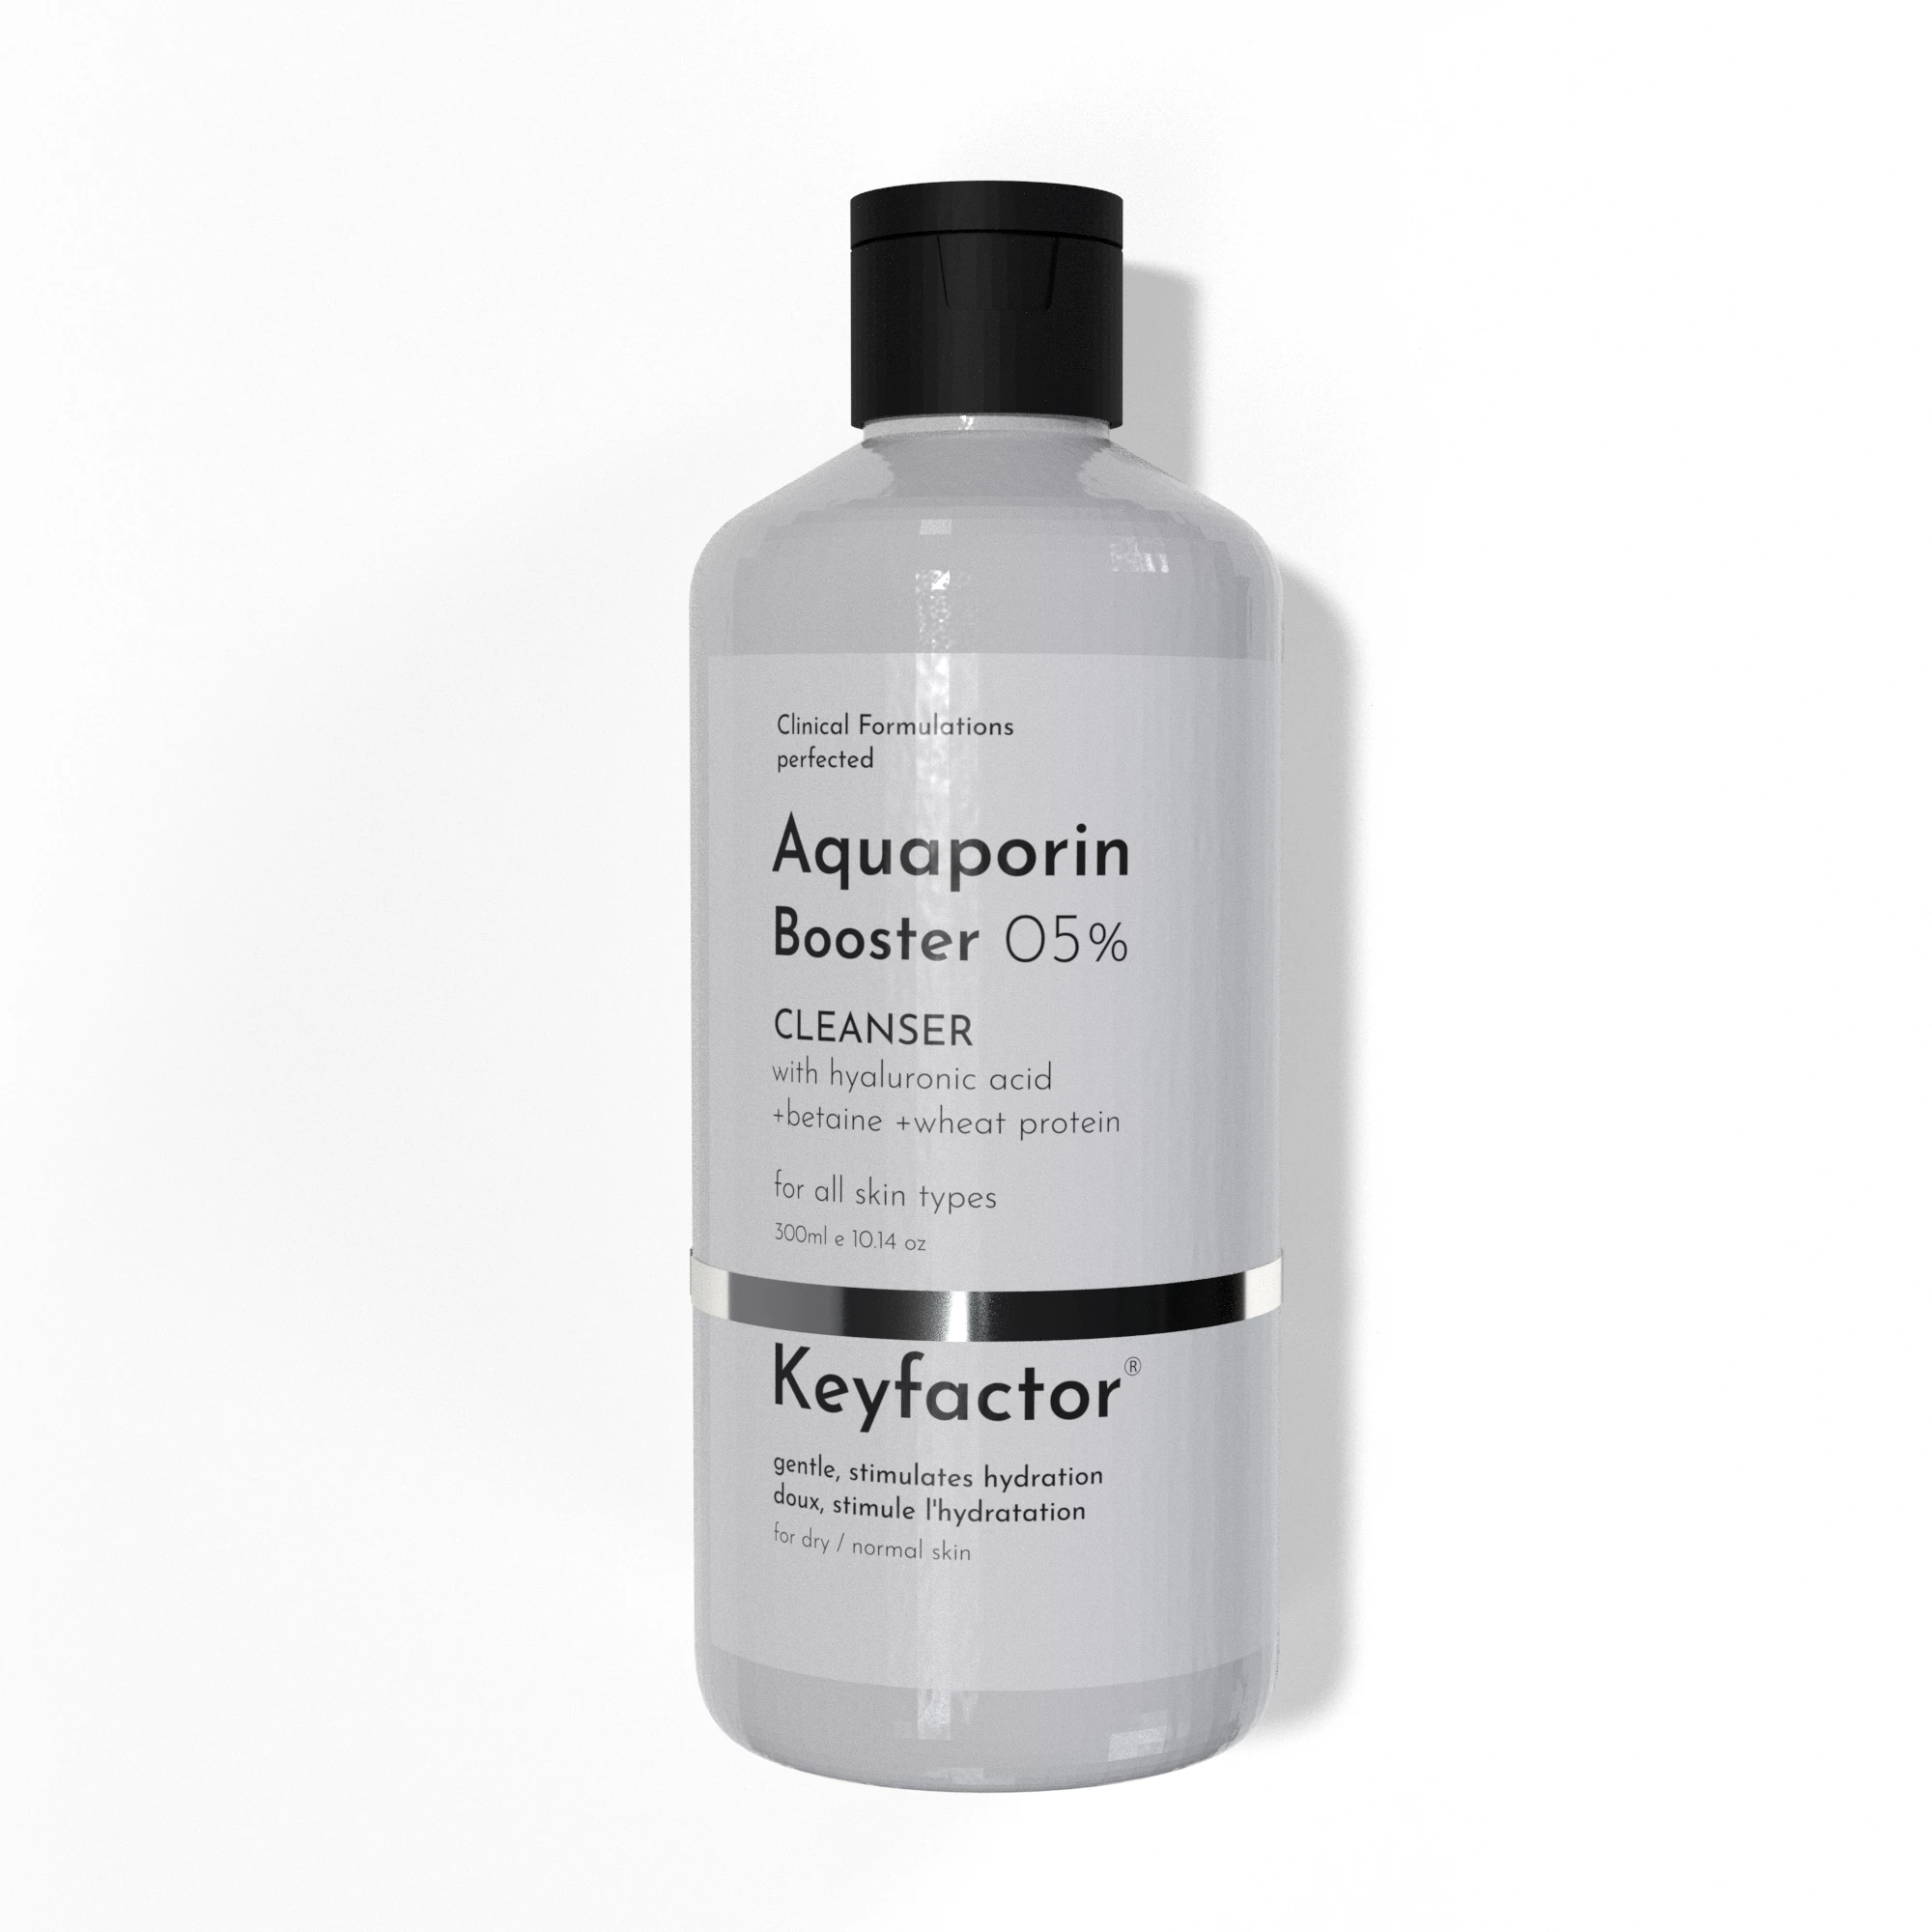 Kf-Aquaporin Booster 05% Cleanser -300Ml.